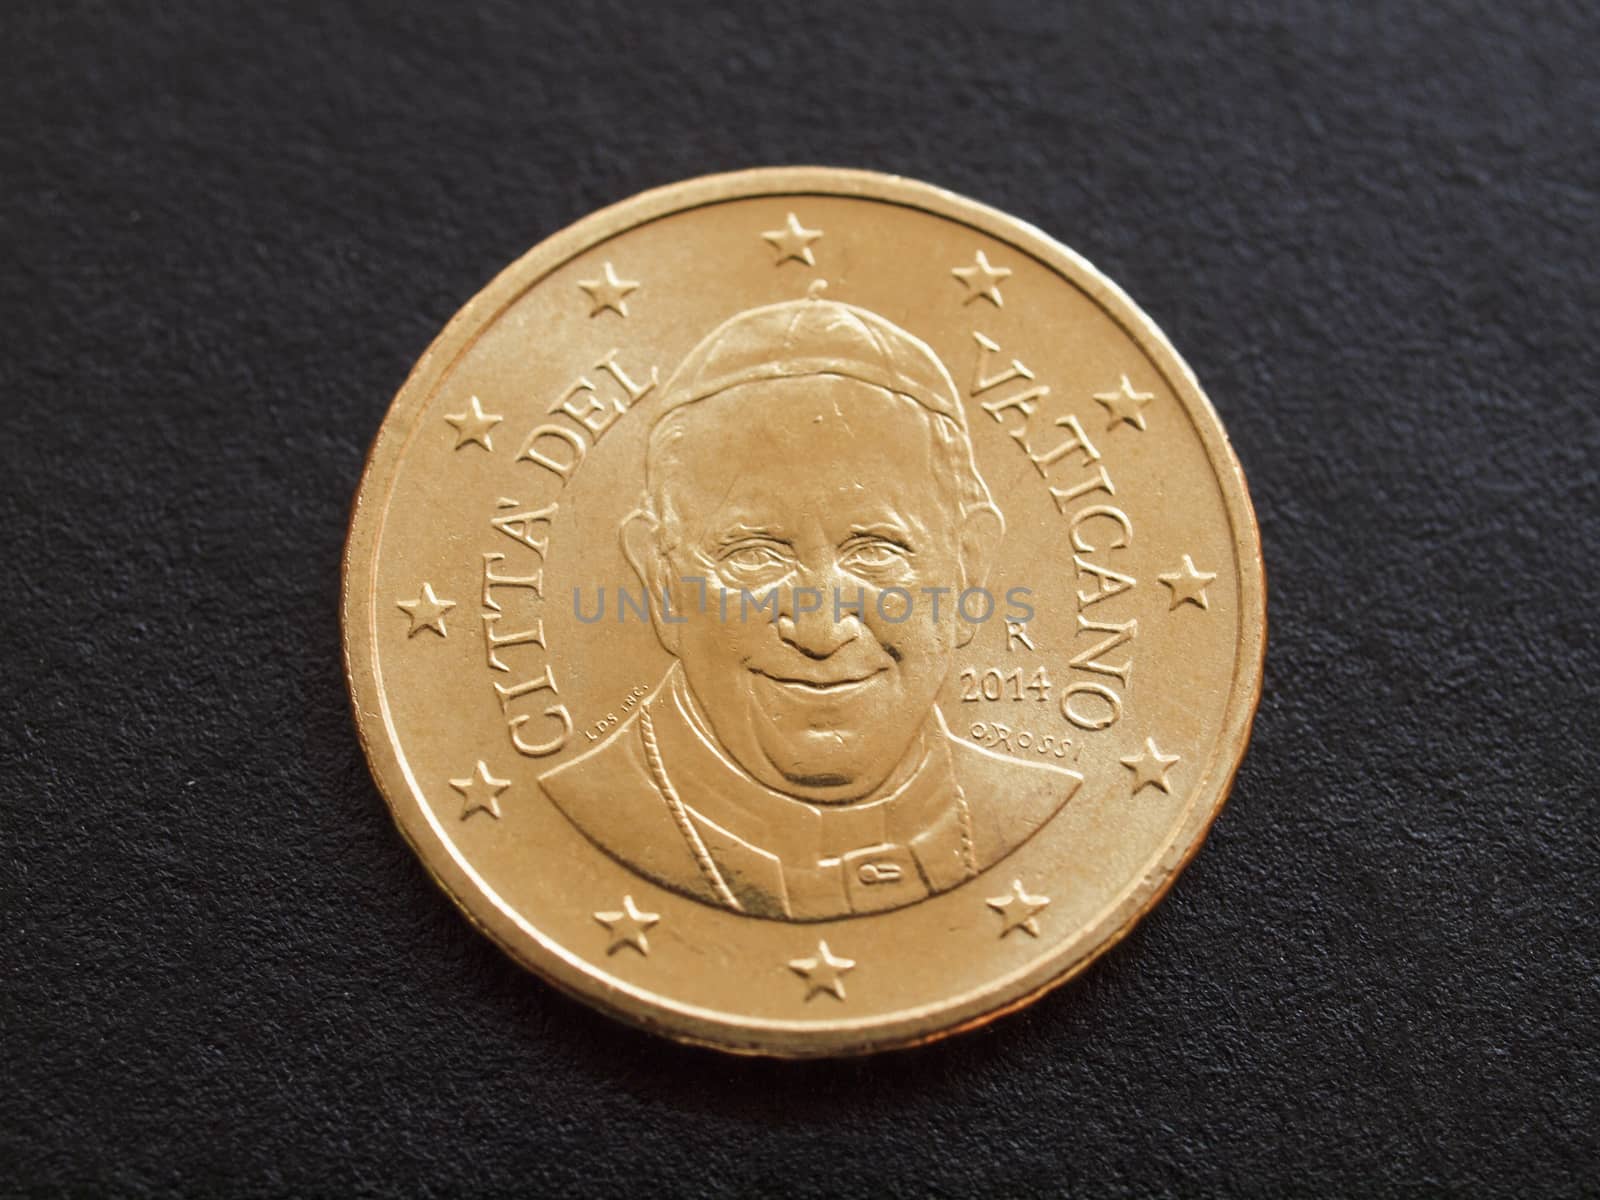 pope Francis I coin by paolo77